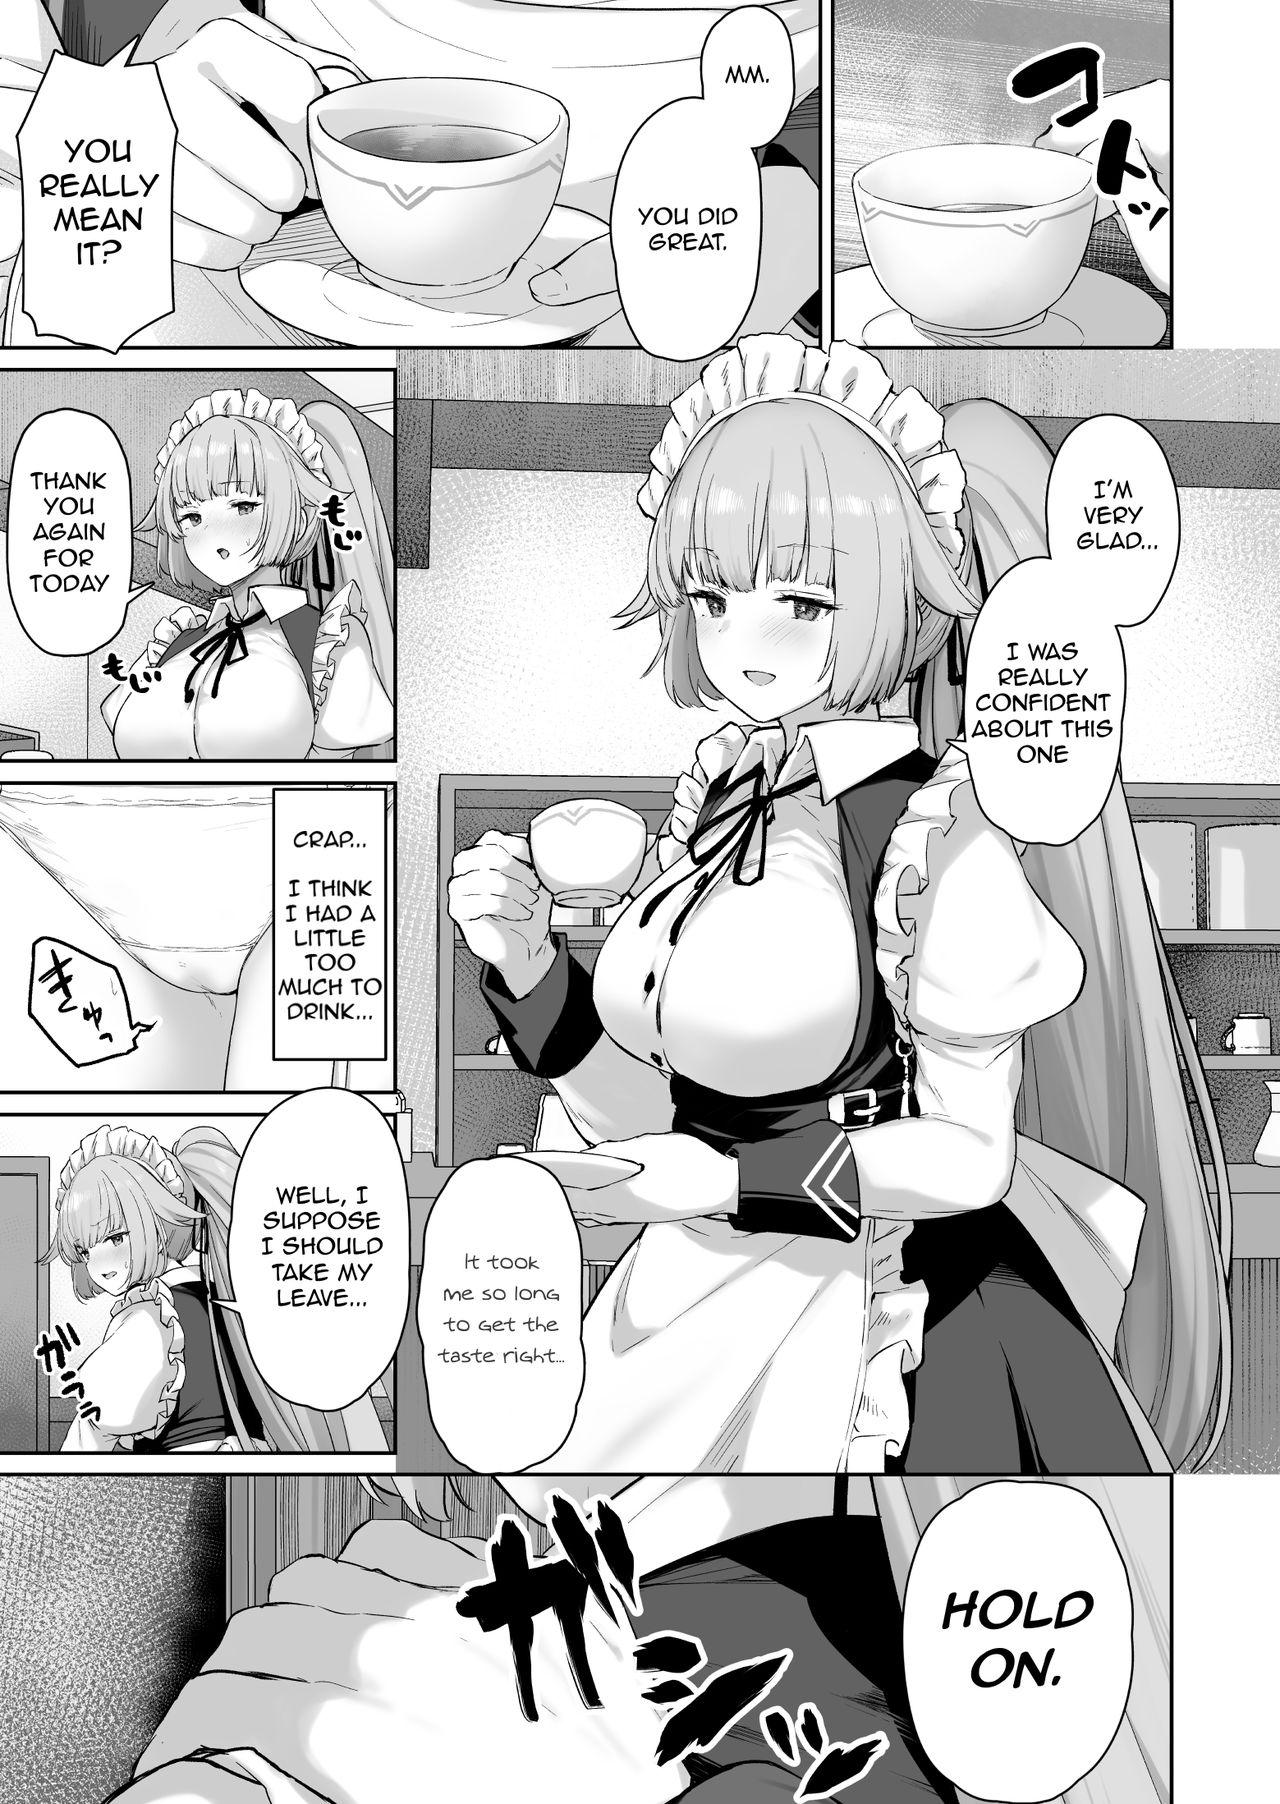 And NTW-20 - Girls frontline Seduction Porn - Page 1